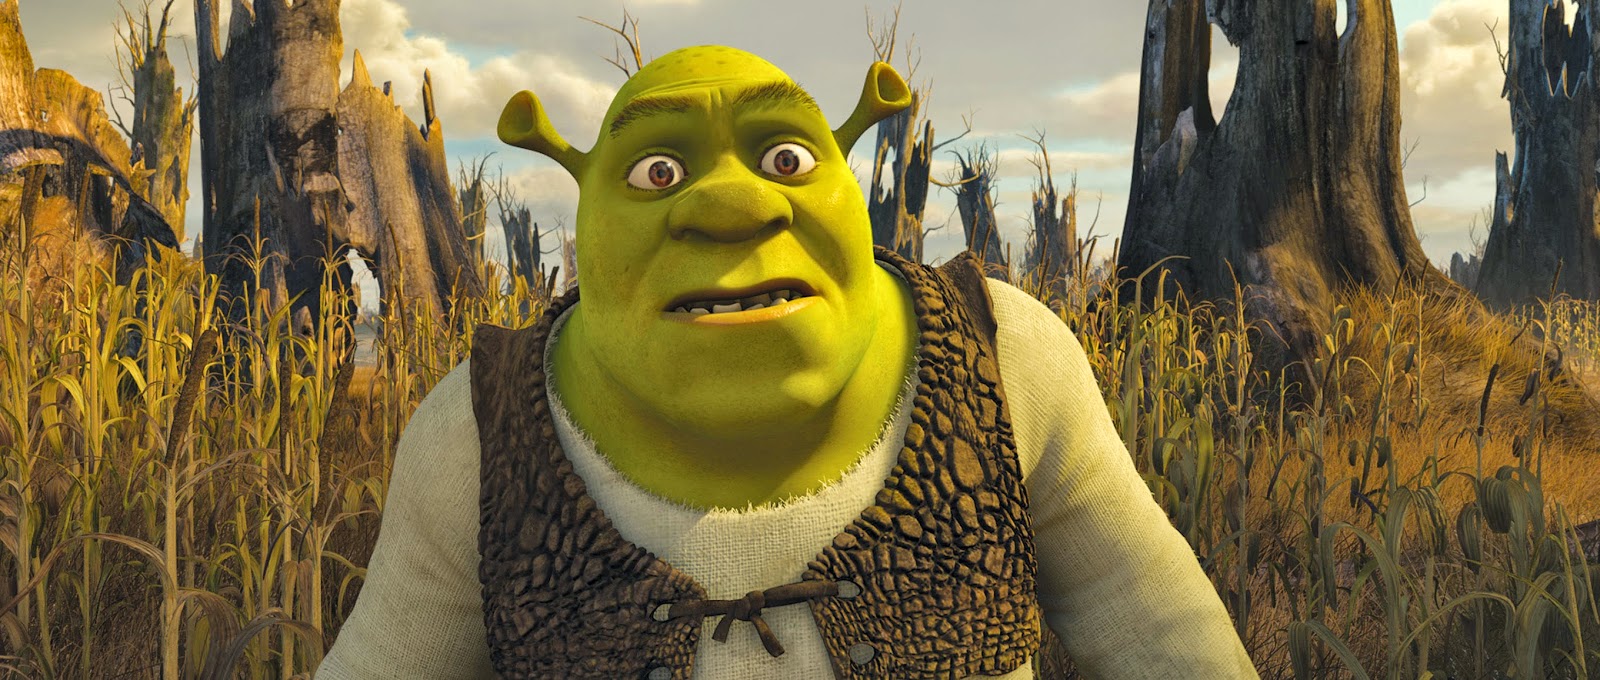 The Internet is convinced that House of the Dragon is just a Shrek remake